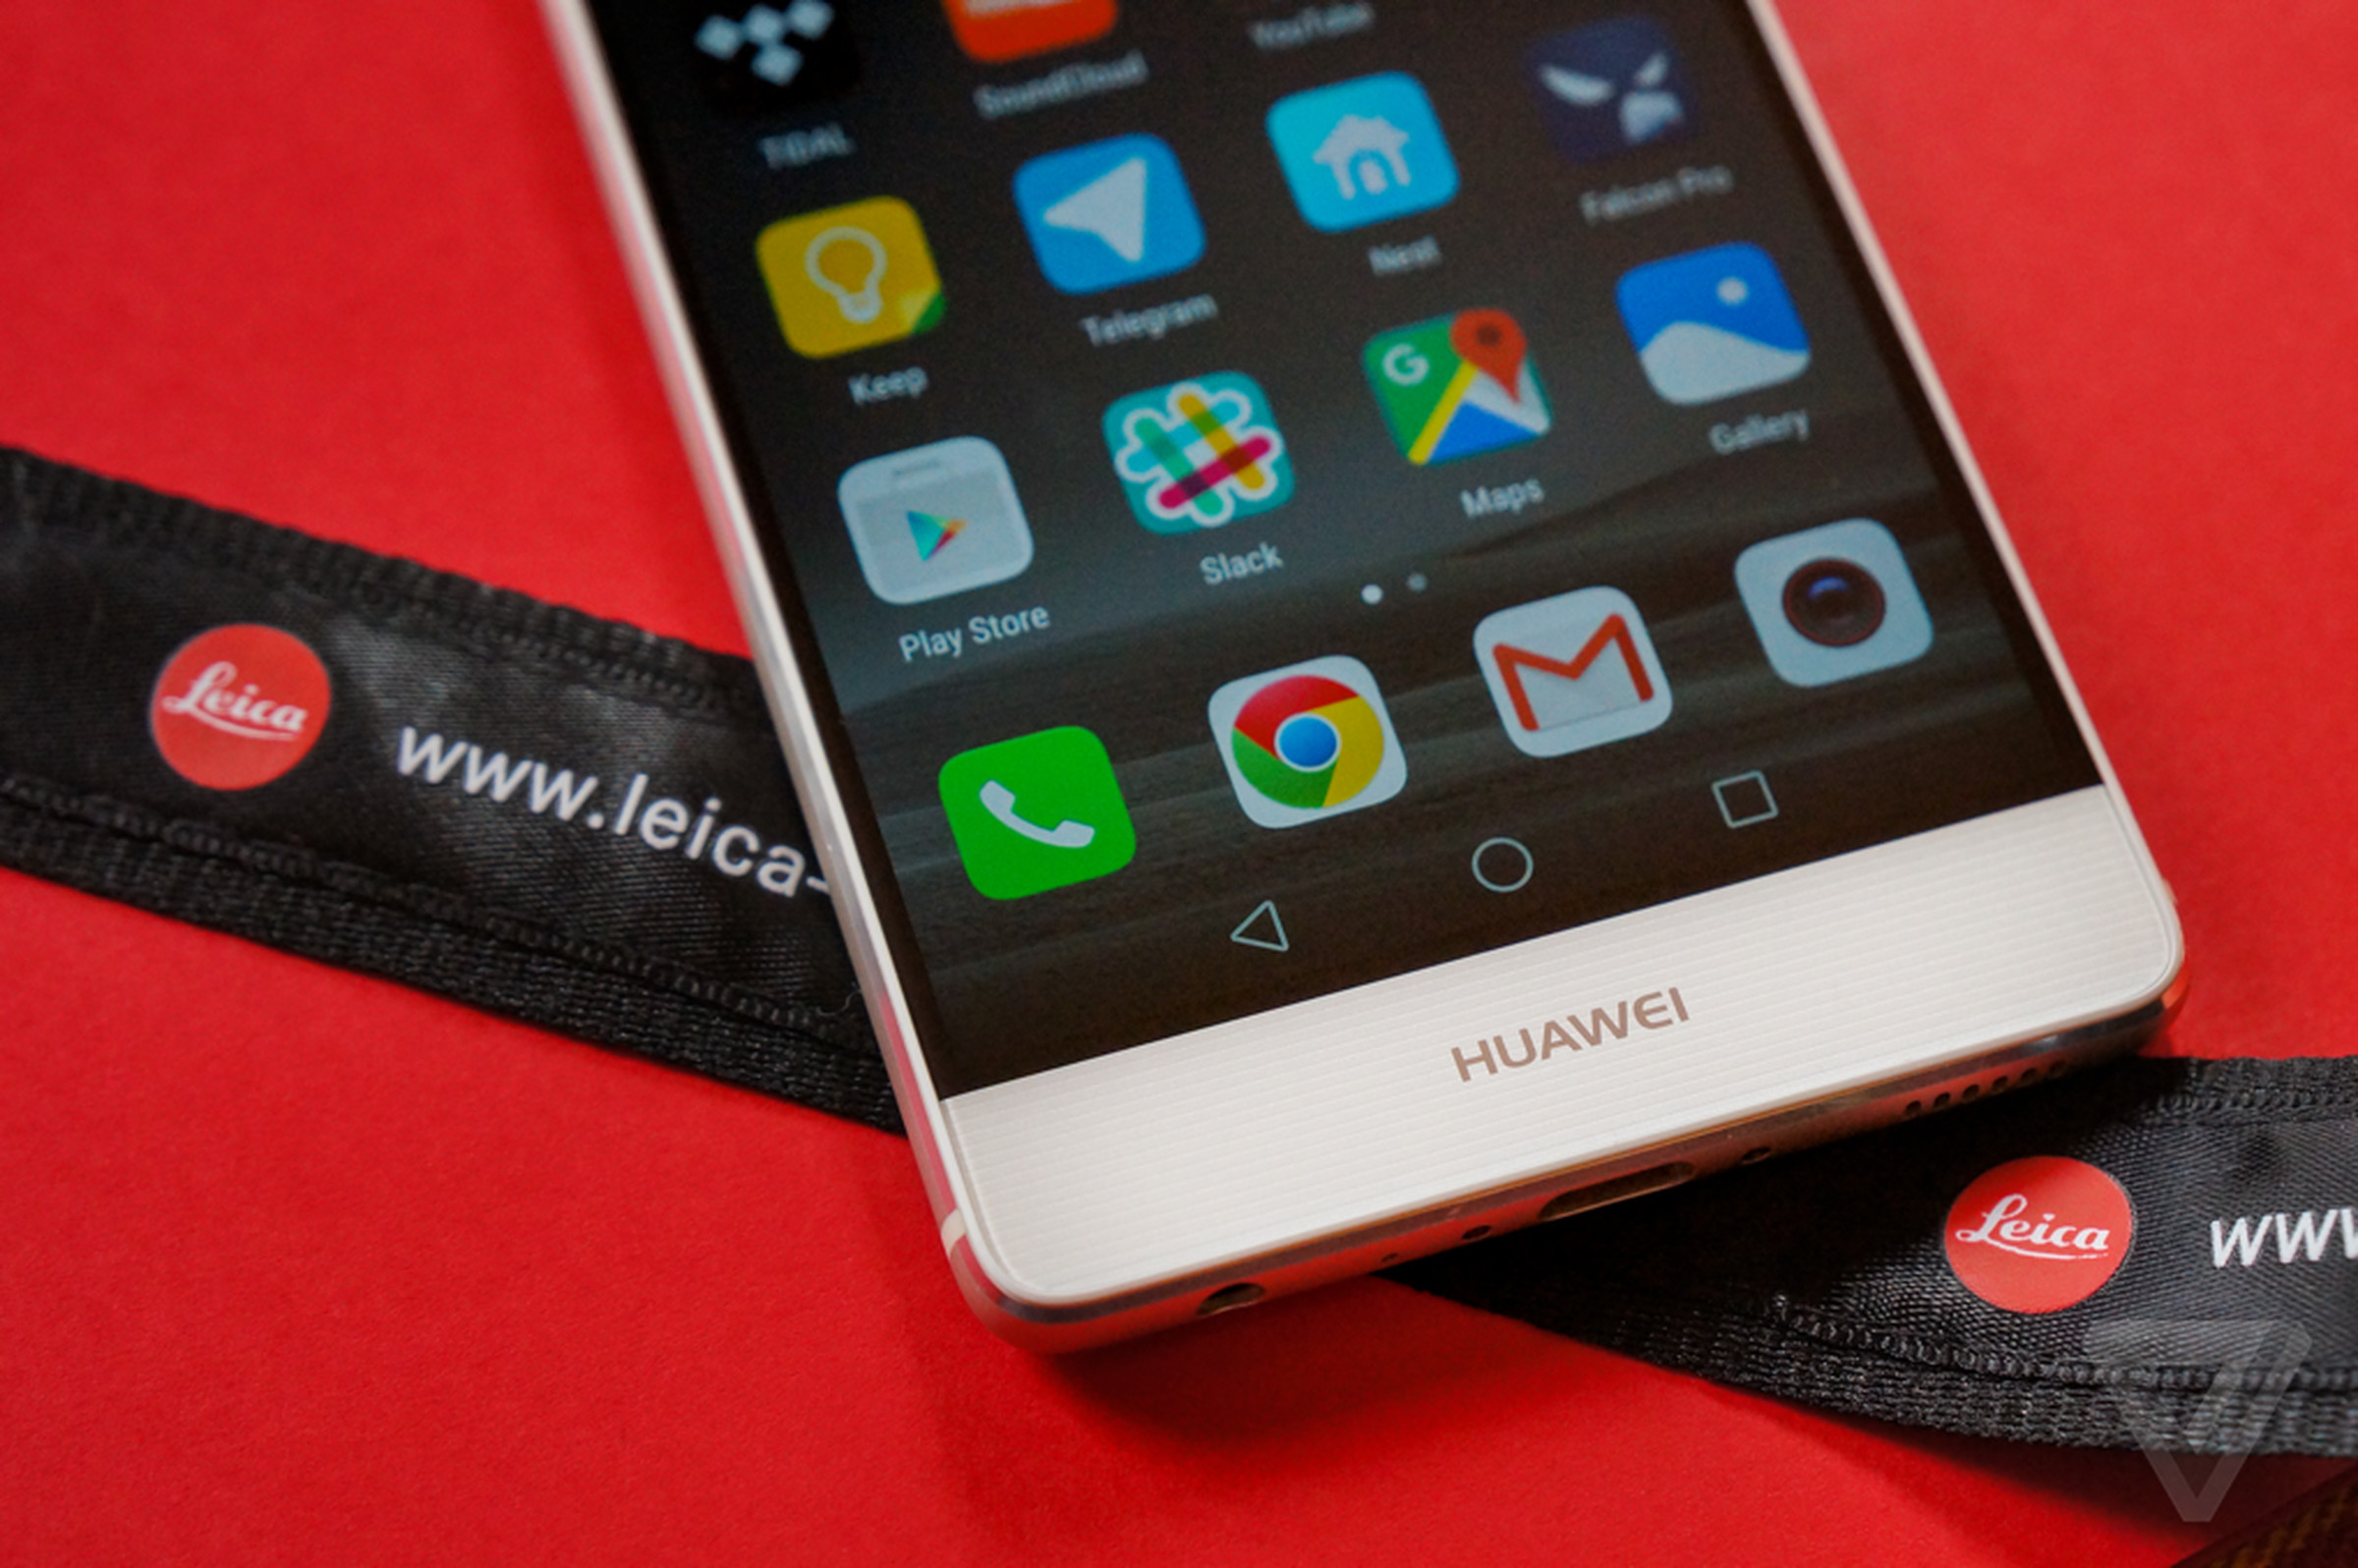 Huawei P9 review gallery